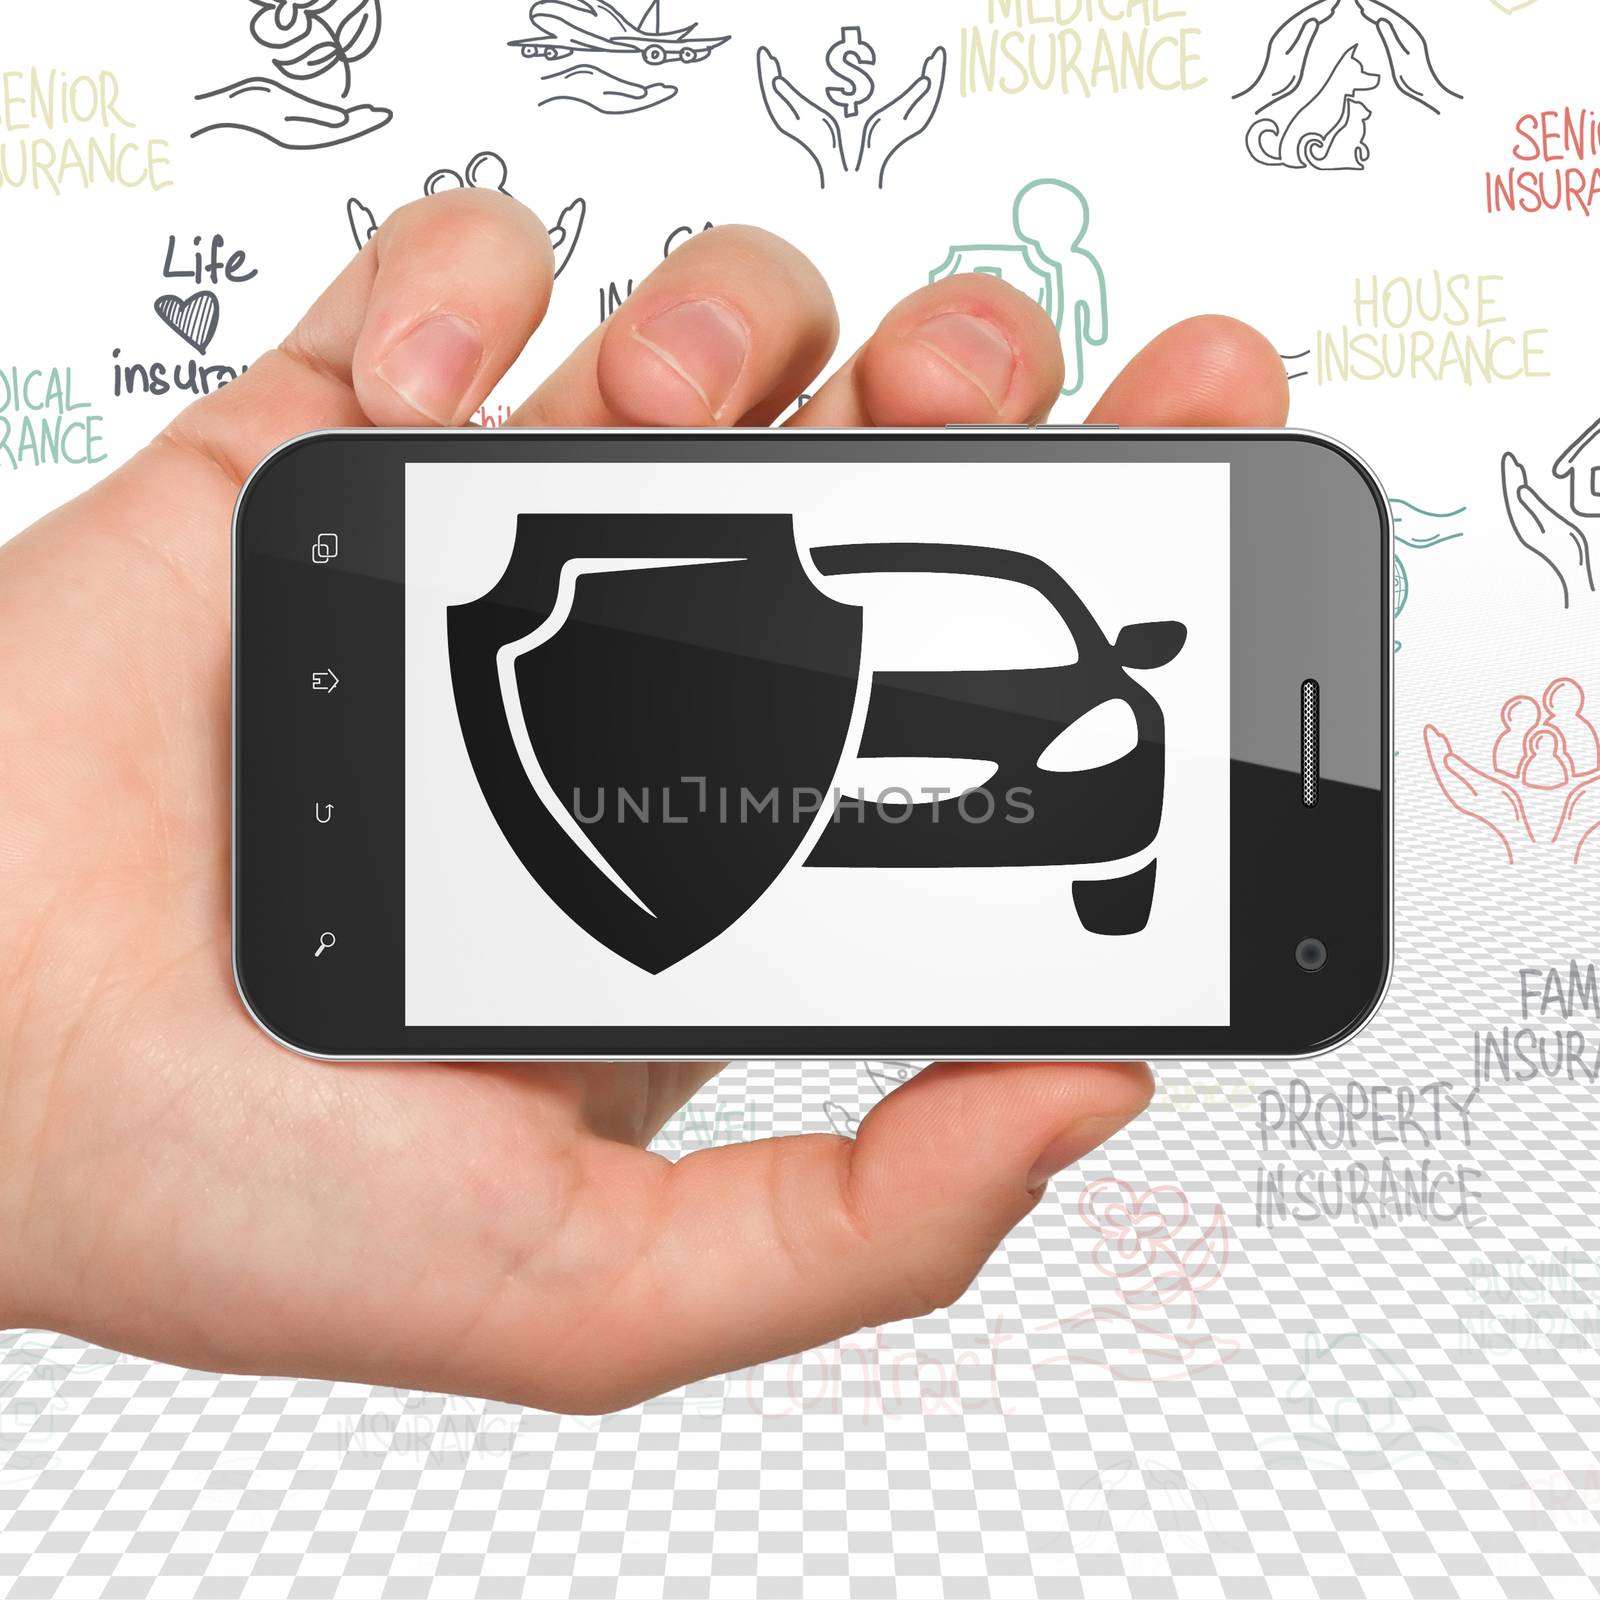 Insurance concept: Hand Holding Smartphone with  black Car And Shield icon on display,  Hand Drawn Insurance Icons background, 3D rendering